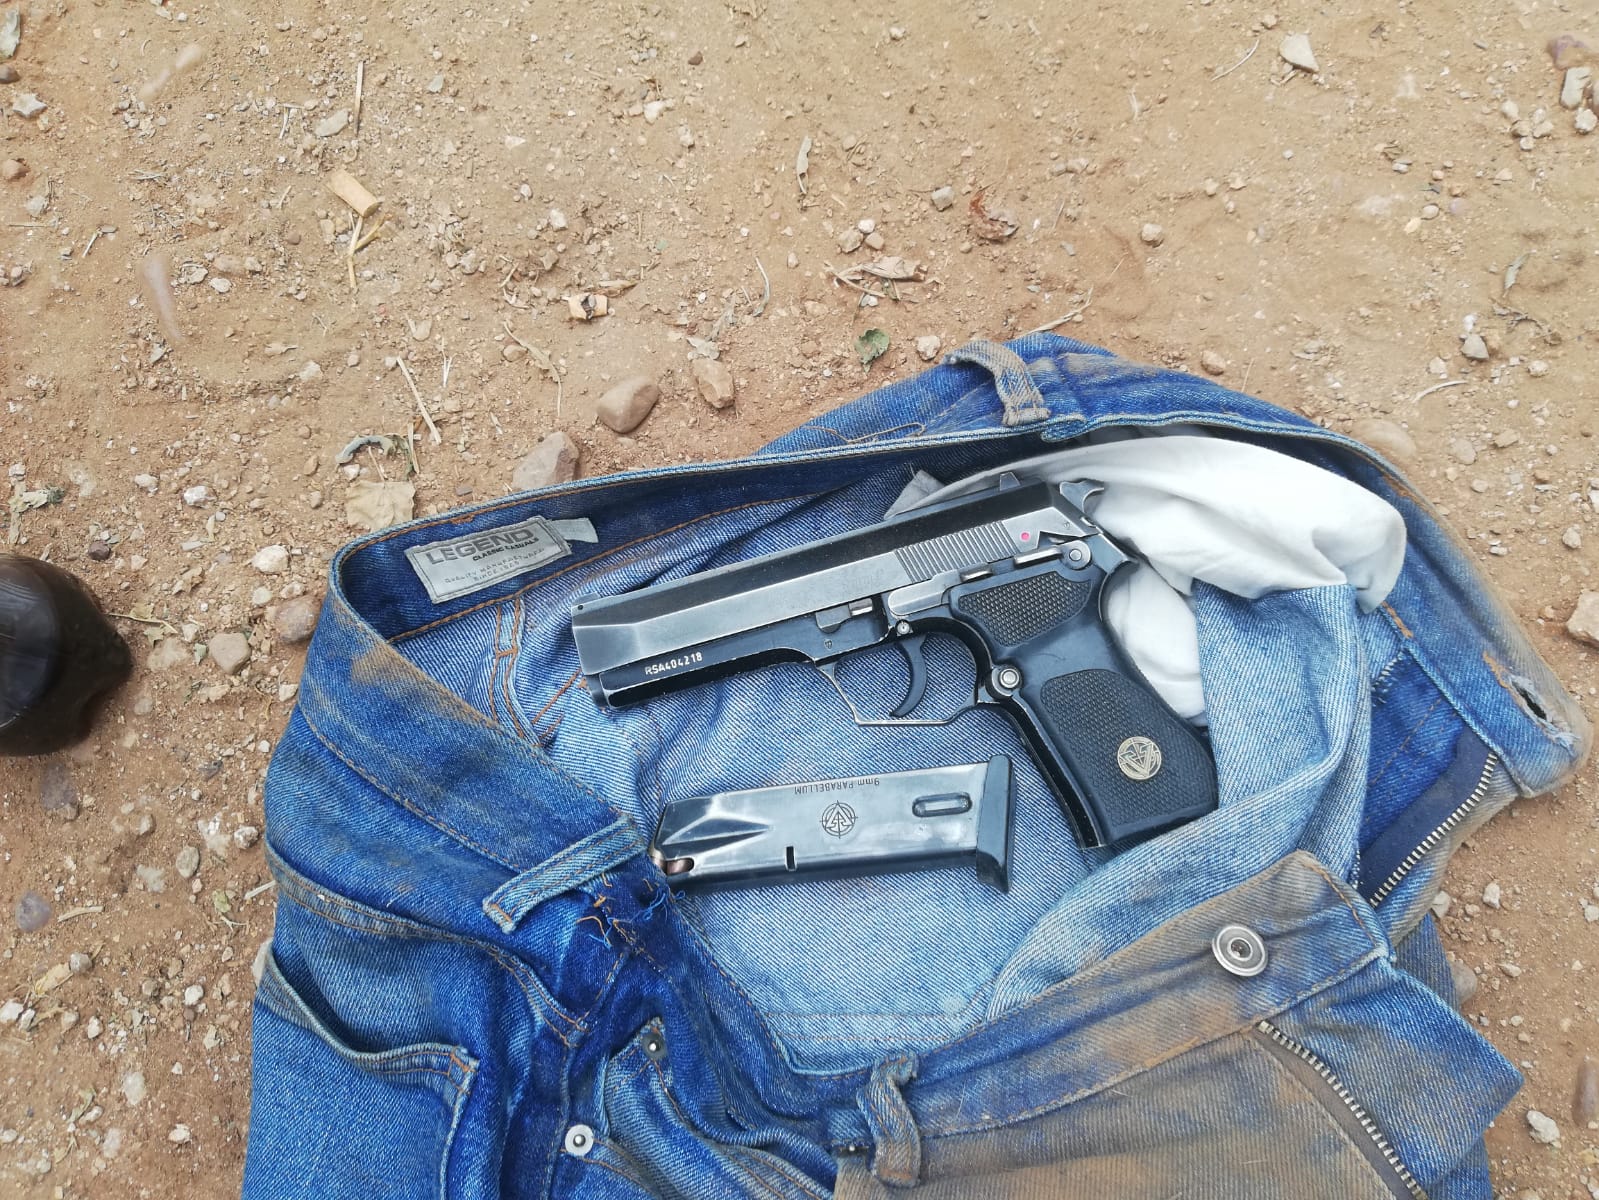 Gqeberha flying squad arrest suspects and recover firearms in separate incidents